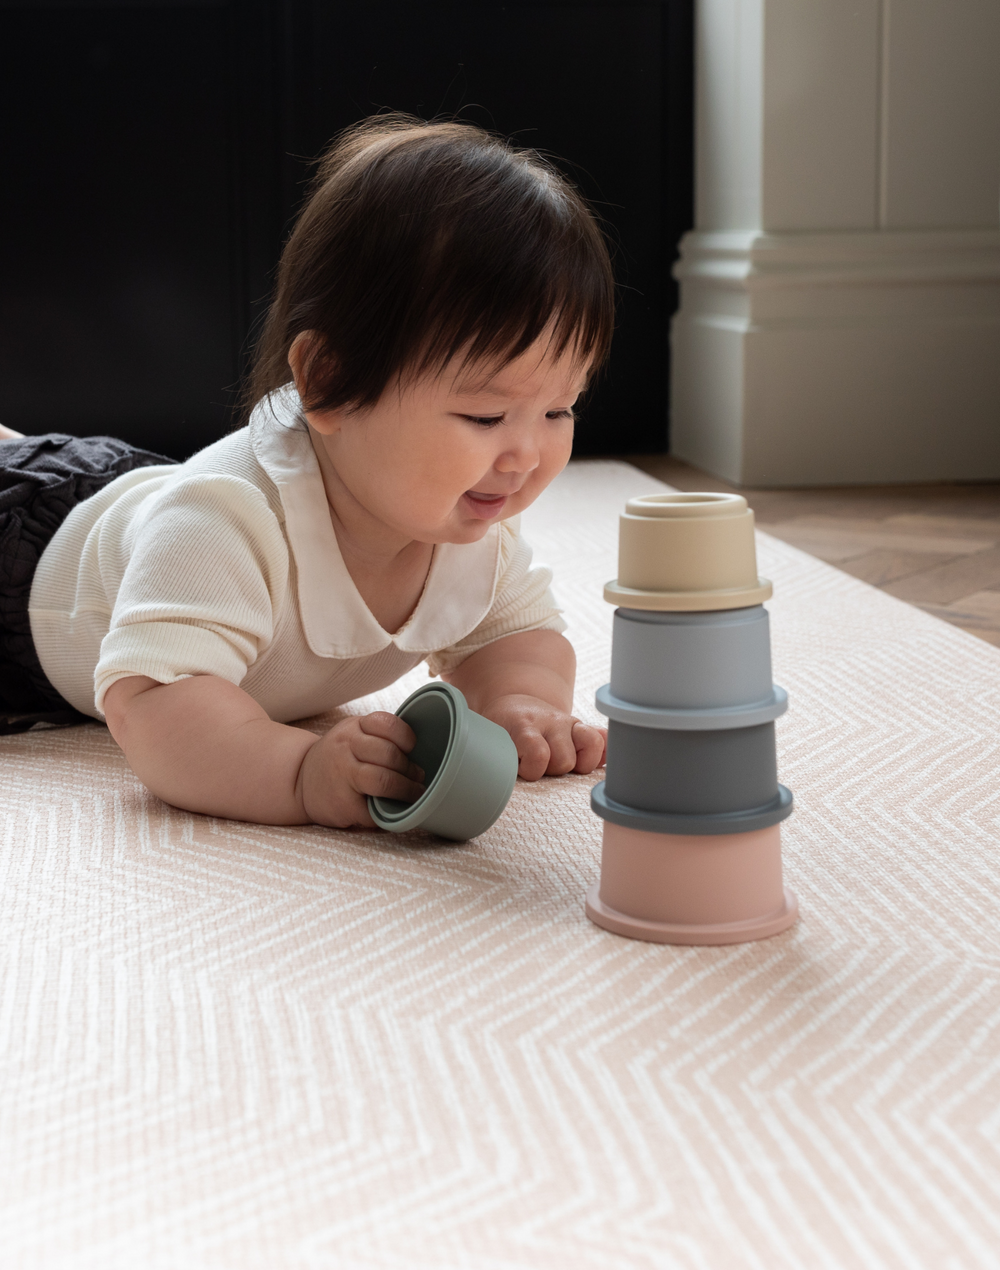 Baby stacks cups on soft toddler play mat designed to be safe from birth